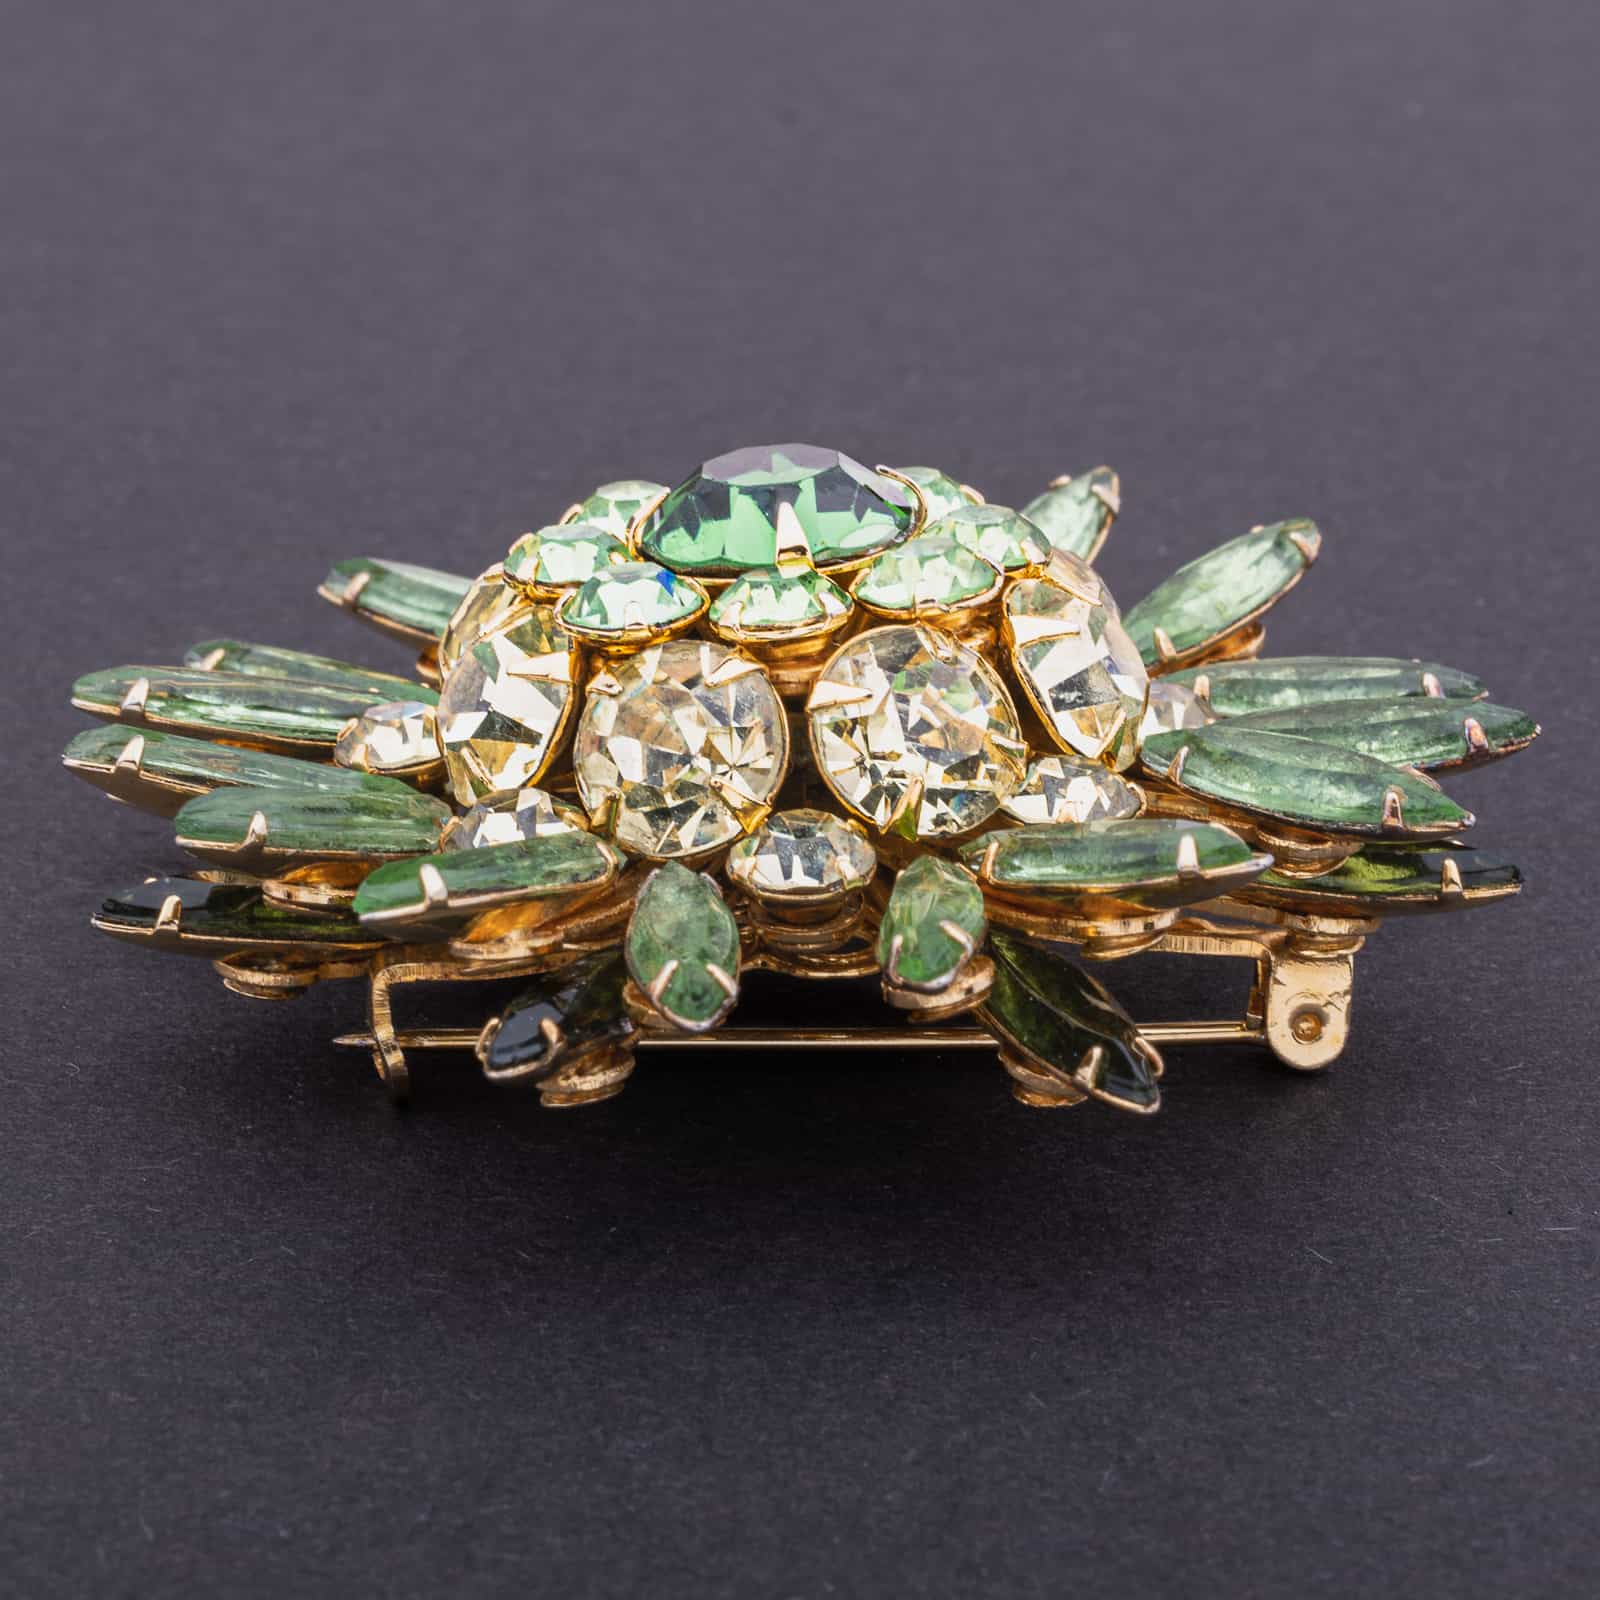 JUDY LEE large rhinestone brooch in green and yellow